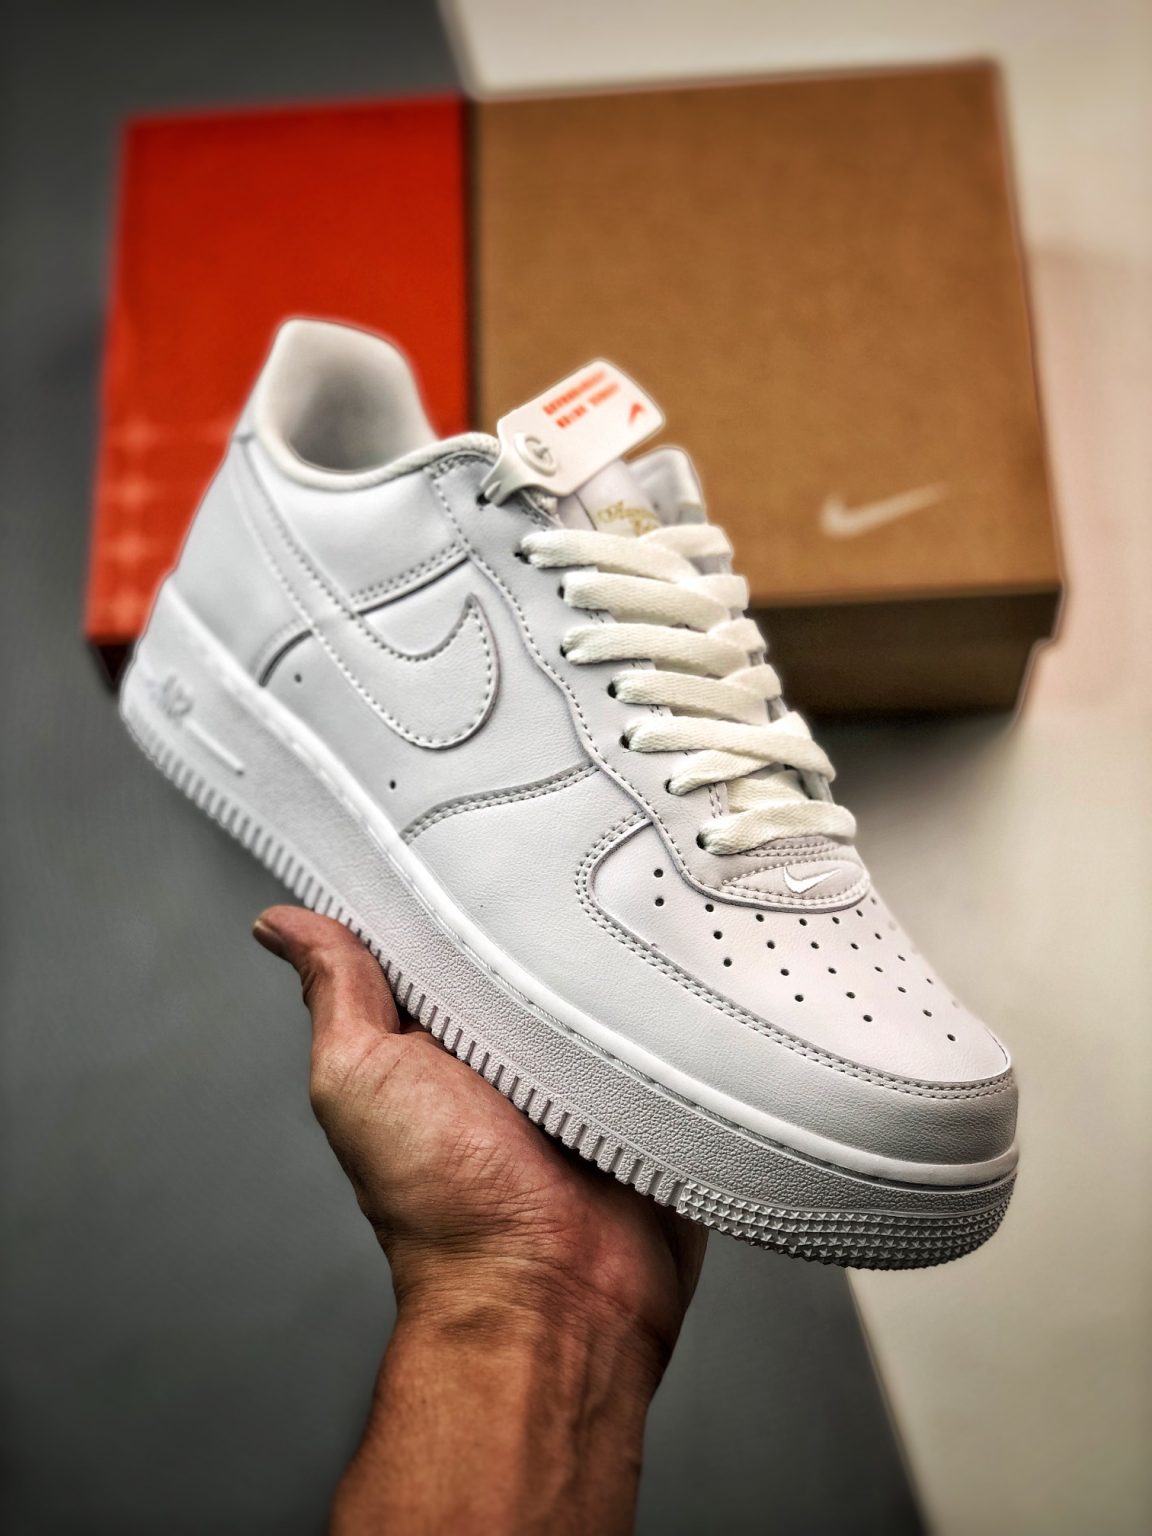 Nike Air Force 1 Low “Since 82” Triple White DJ3911-100 For Sale ...